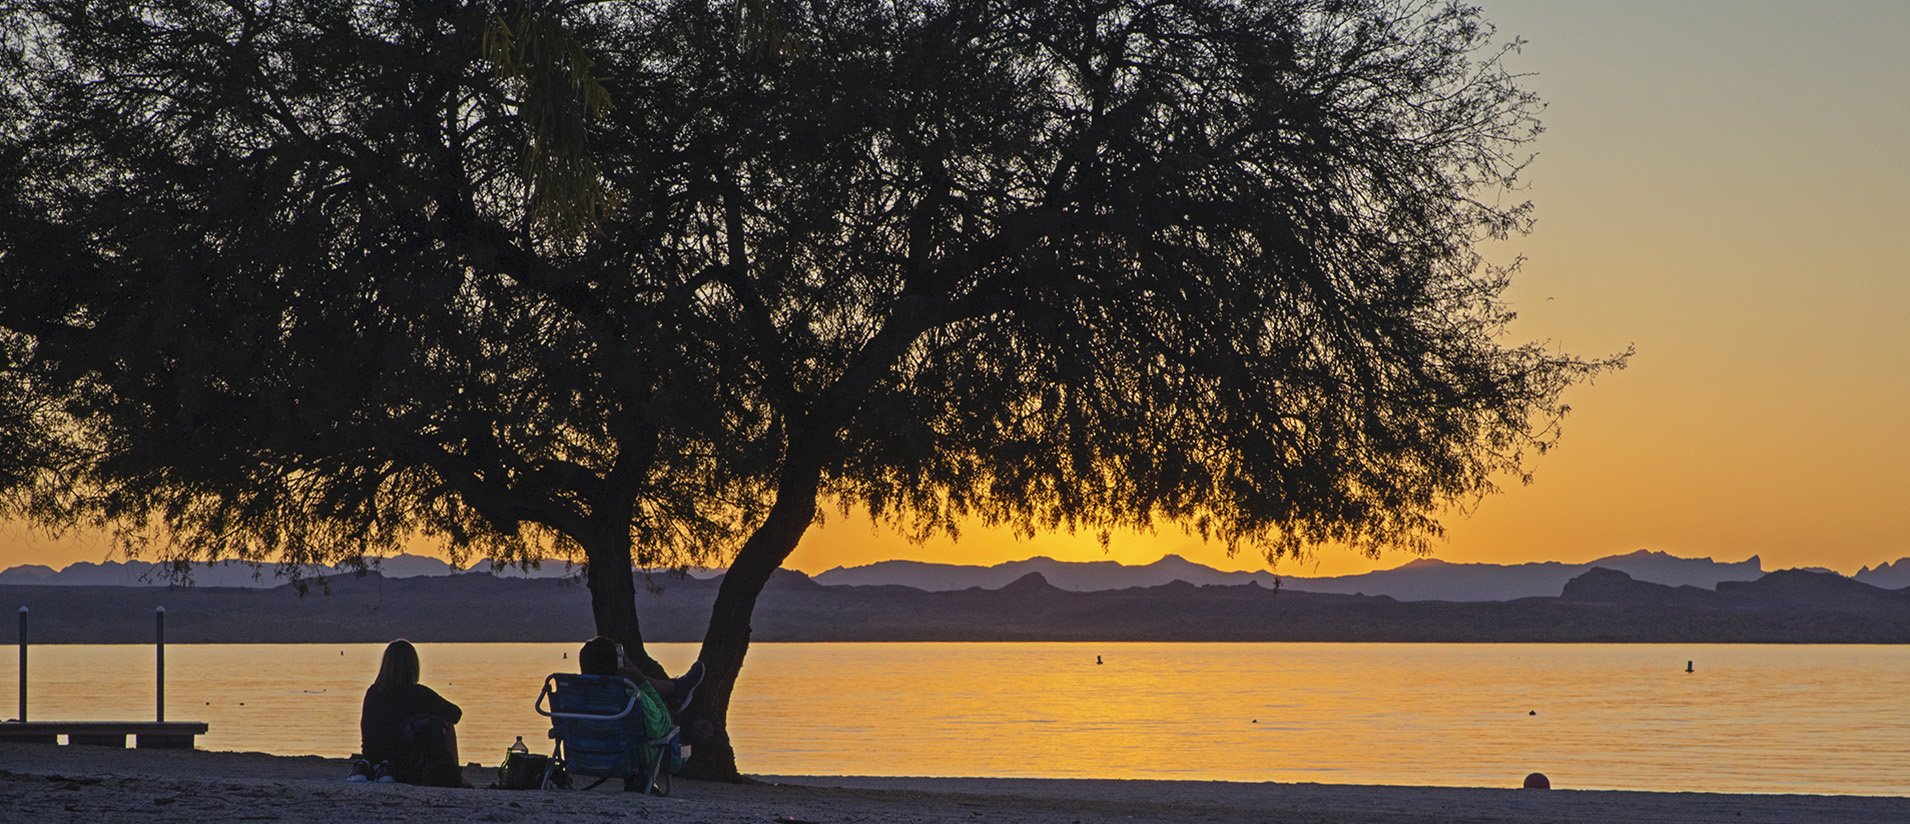 Two campers enjoy sunset over the water at Lake Havasu State Park